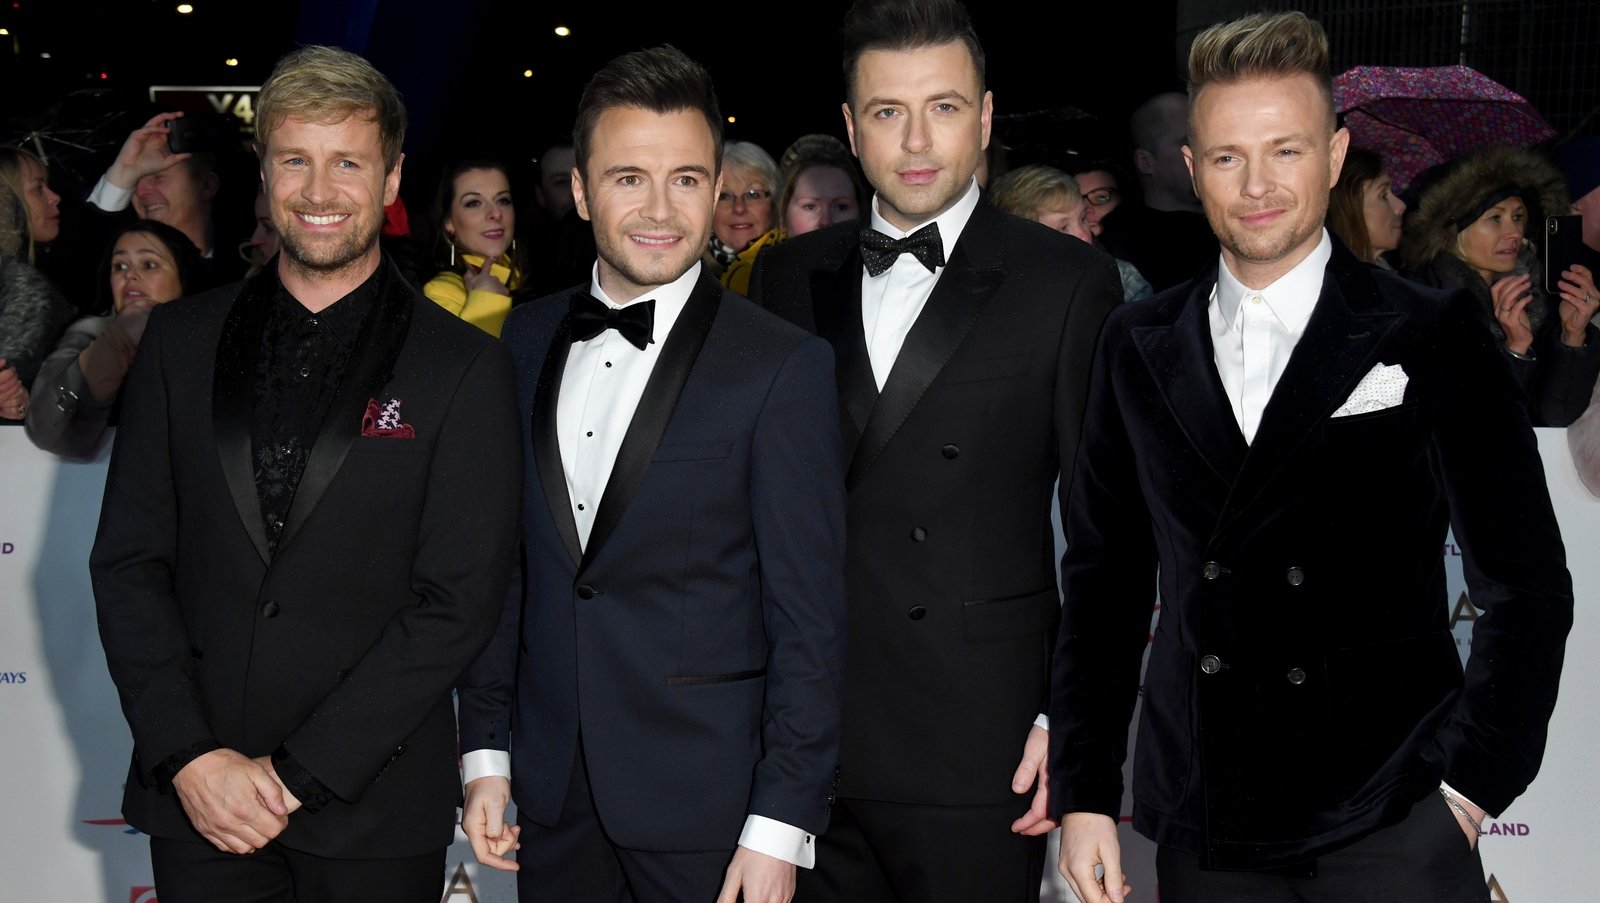 Westlife , pop group, circa 2000. News Photo - Getty Images